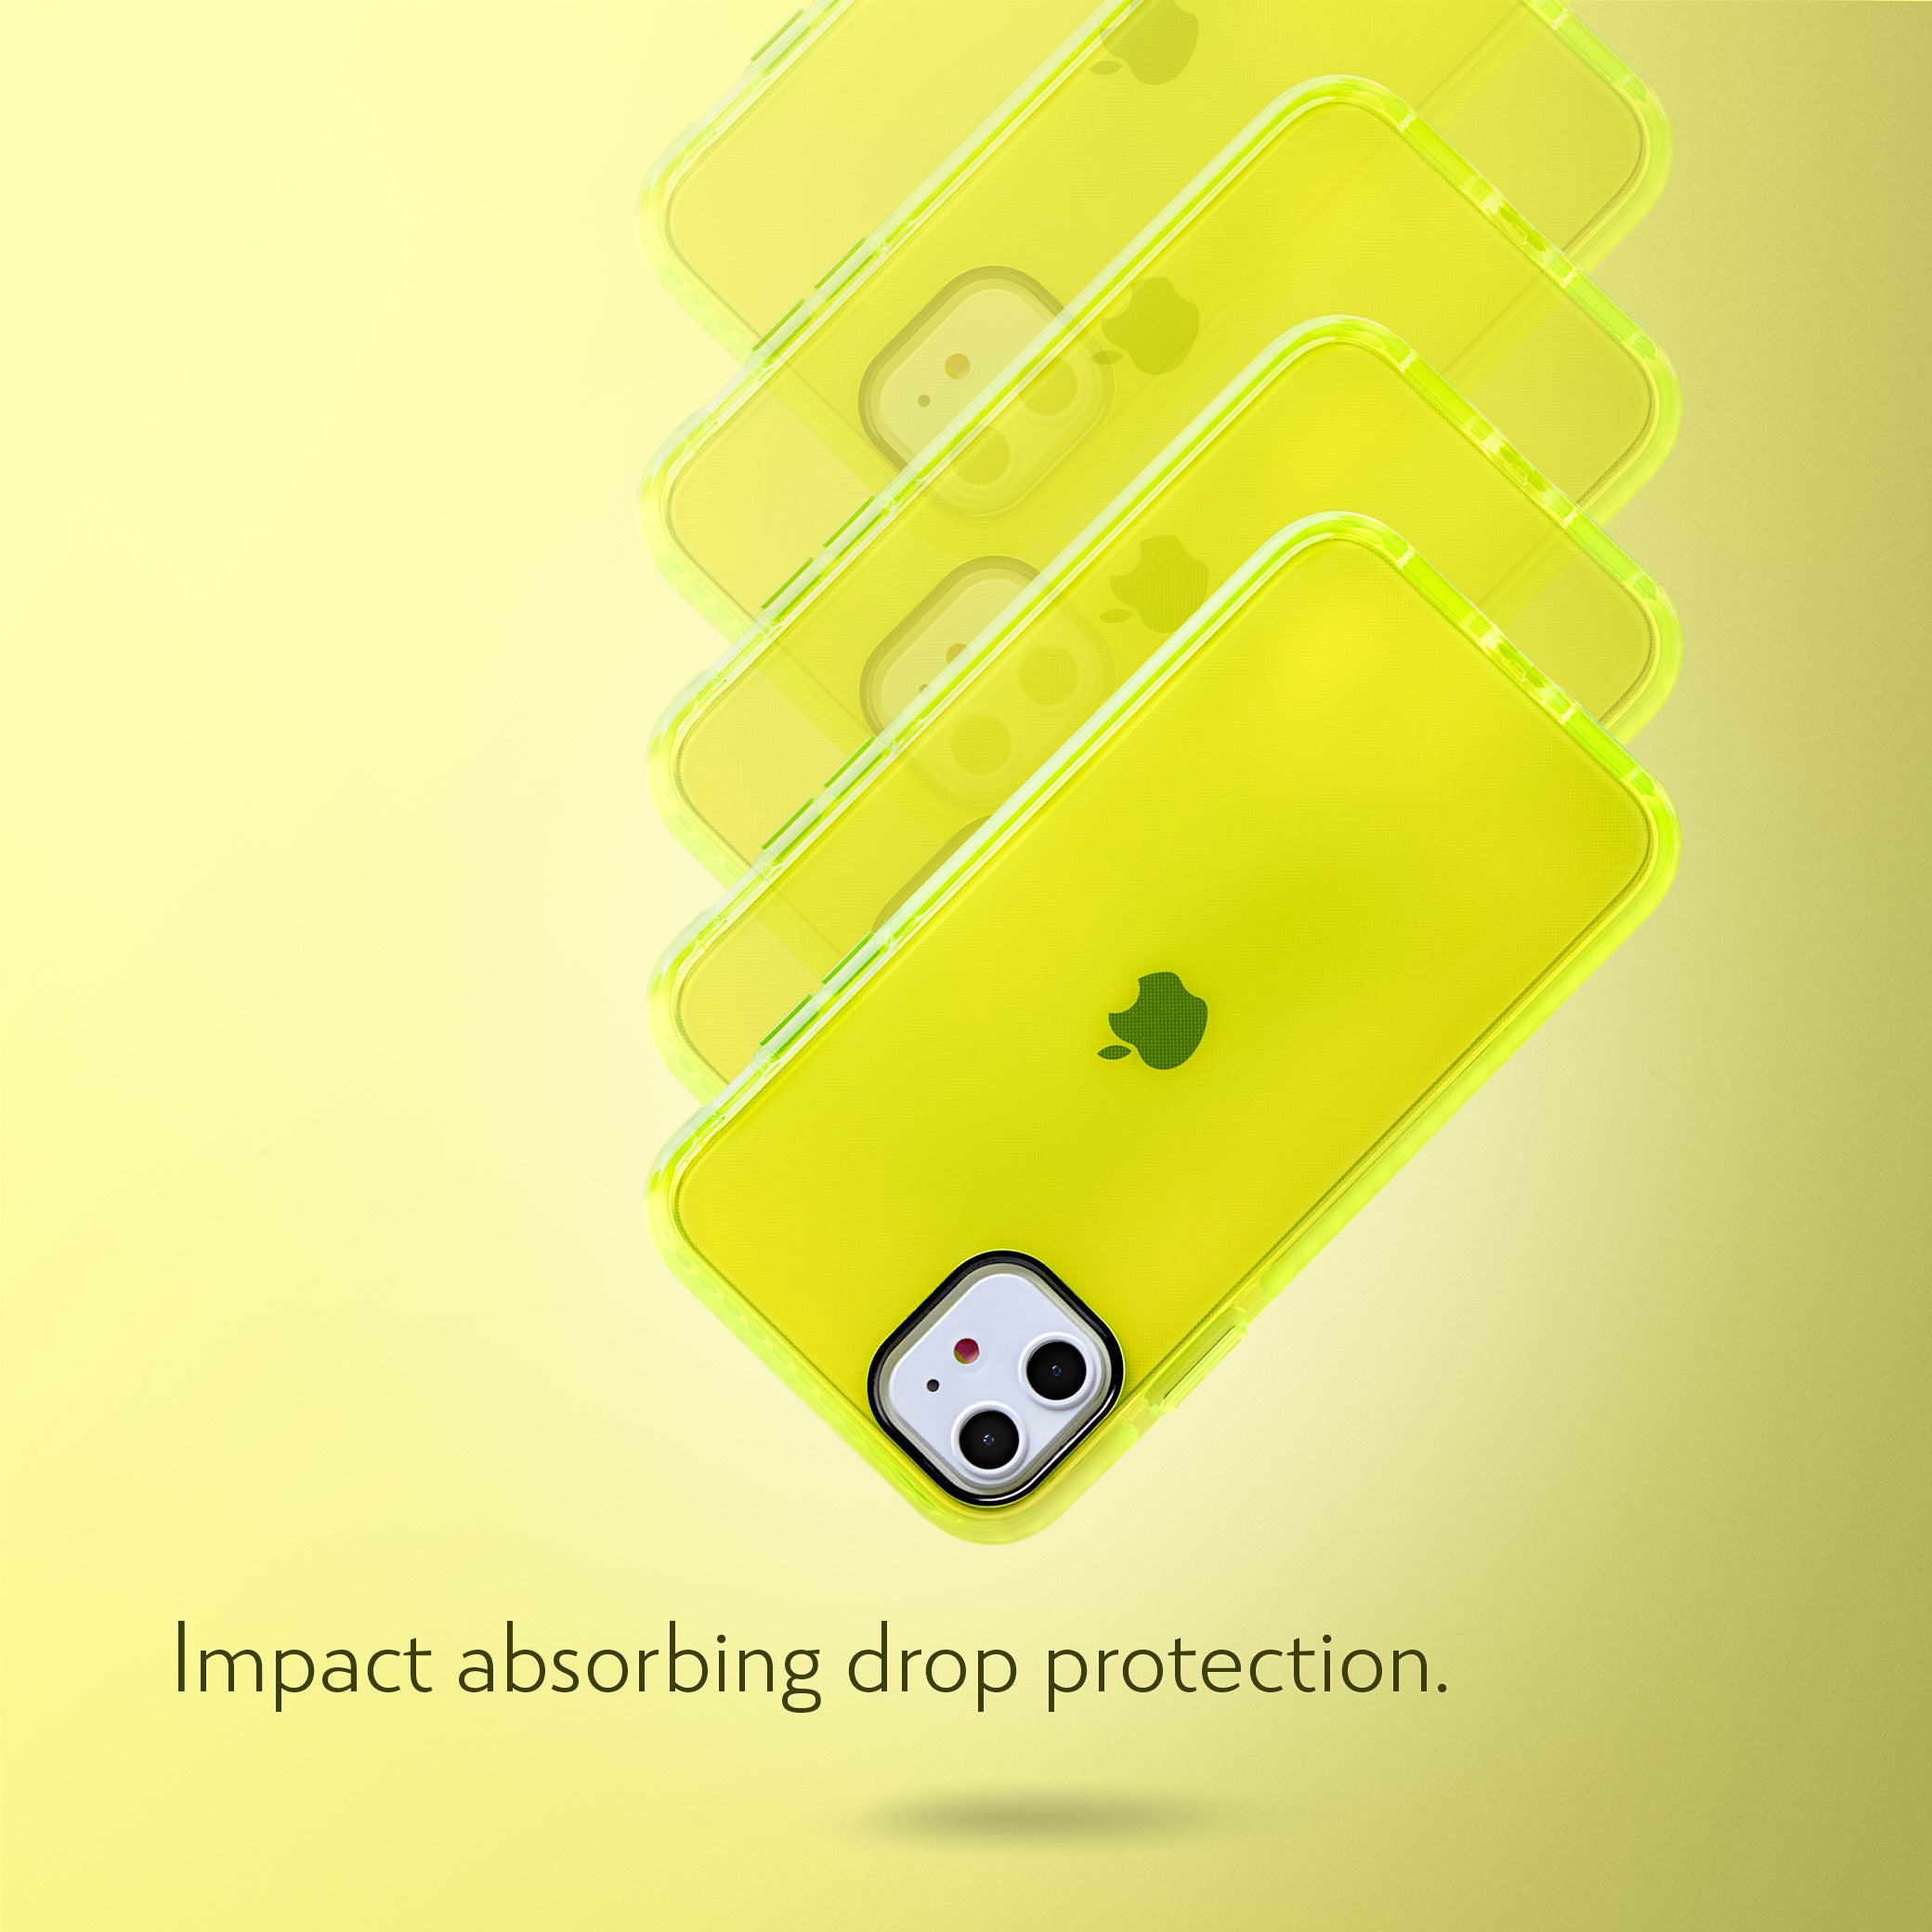 Barrier Case for iPhone 11 - Hi-Energy Neon Yellow